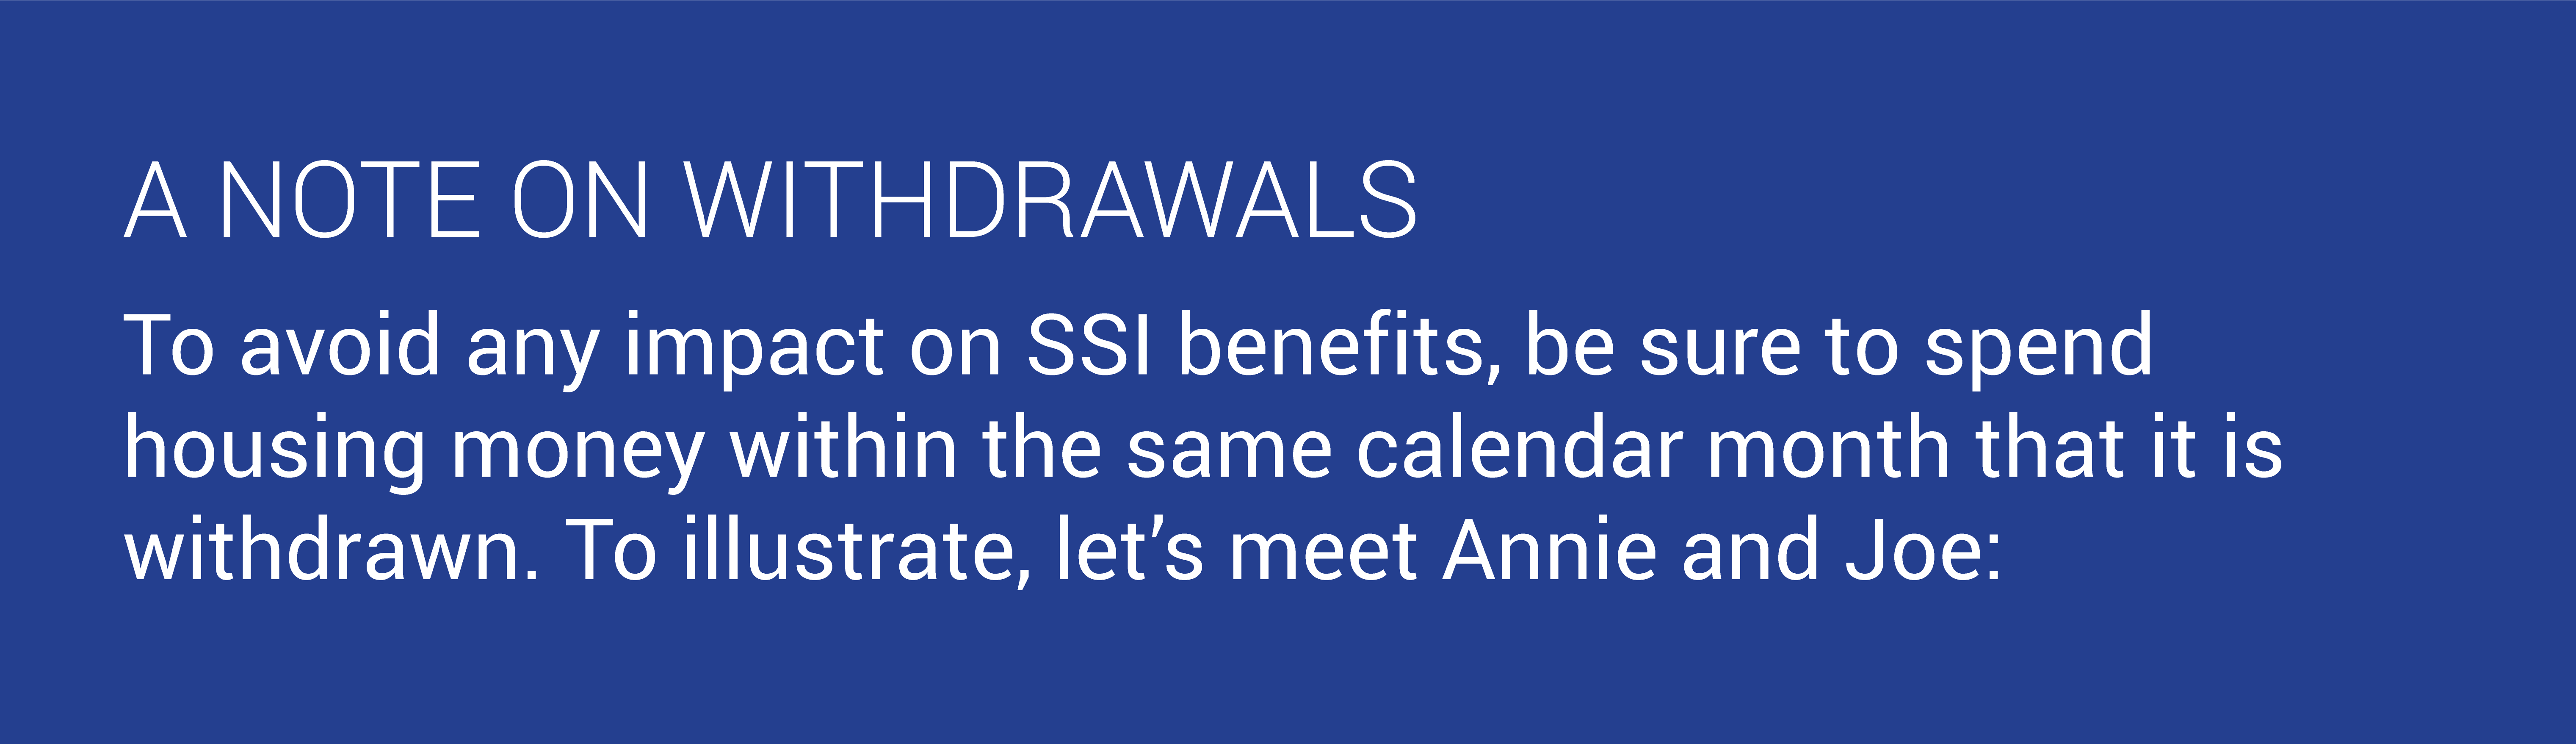 A NOTE ON WITHDRAWALS. To avoid any impact on SSI benefits, be sure to spend housing money within the same calendar month that it is withdrawn. To illustrate, let’s meet Annie and Joe: